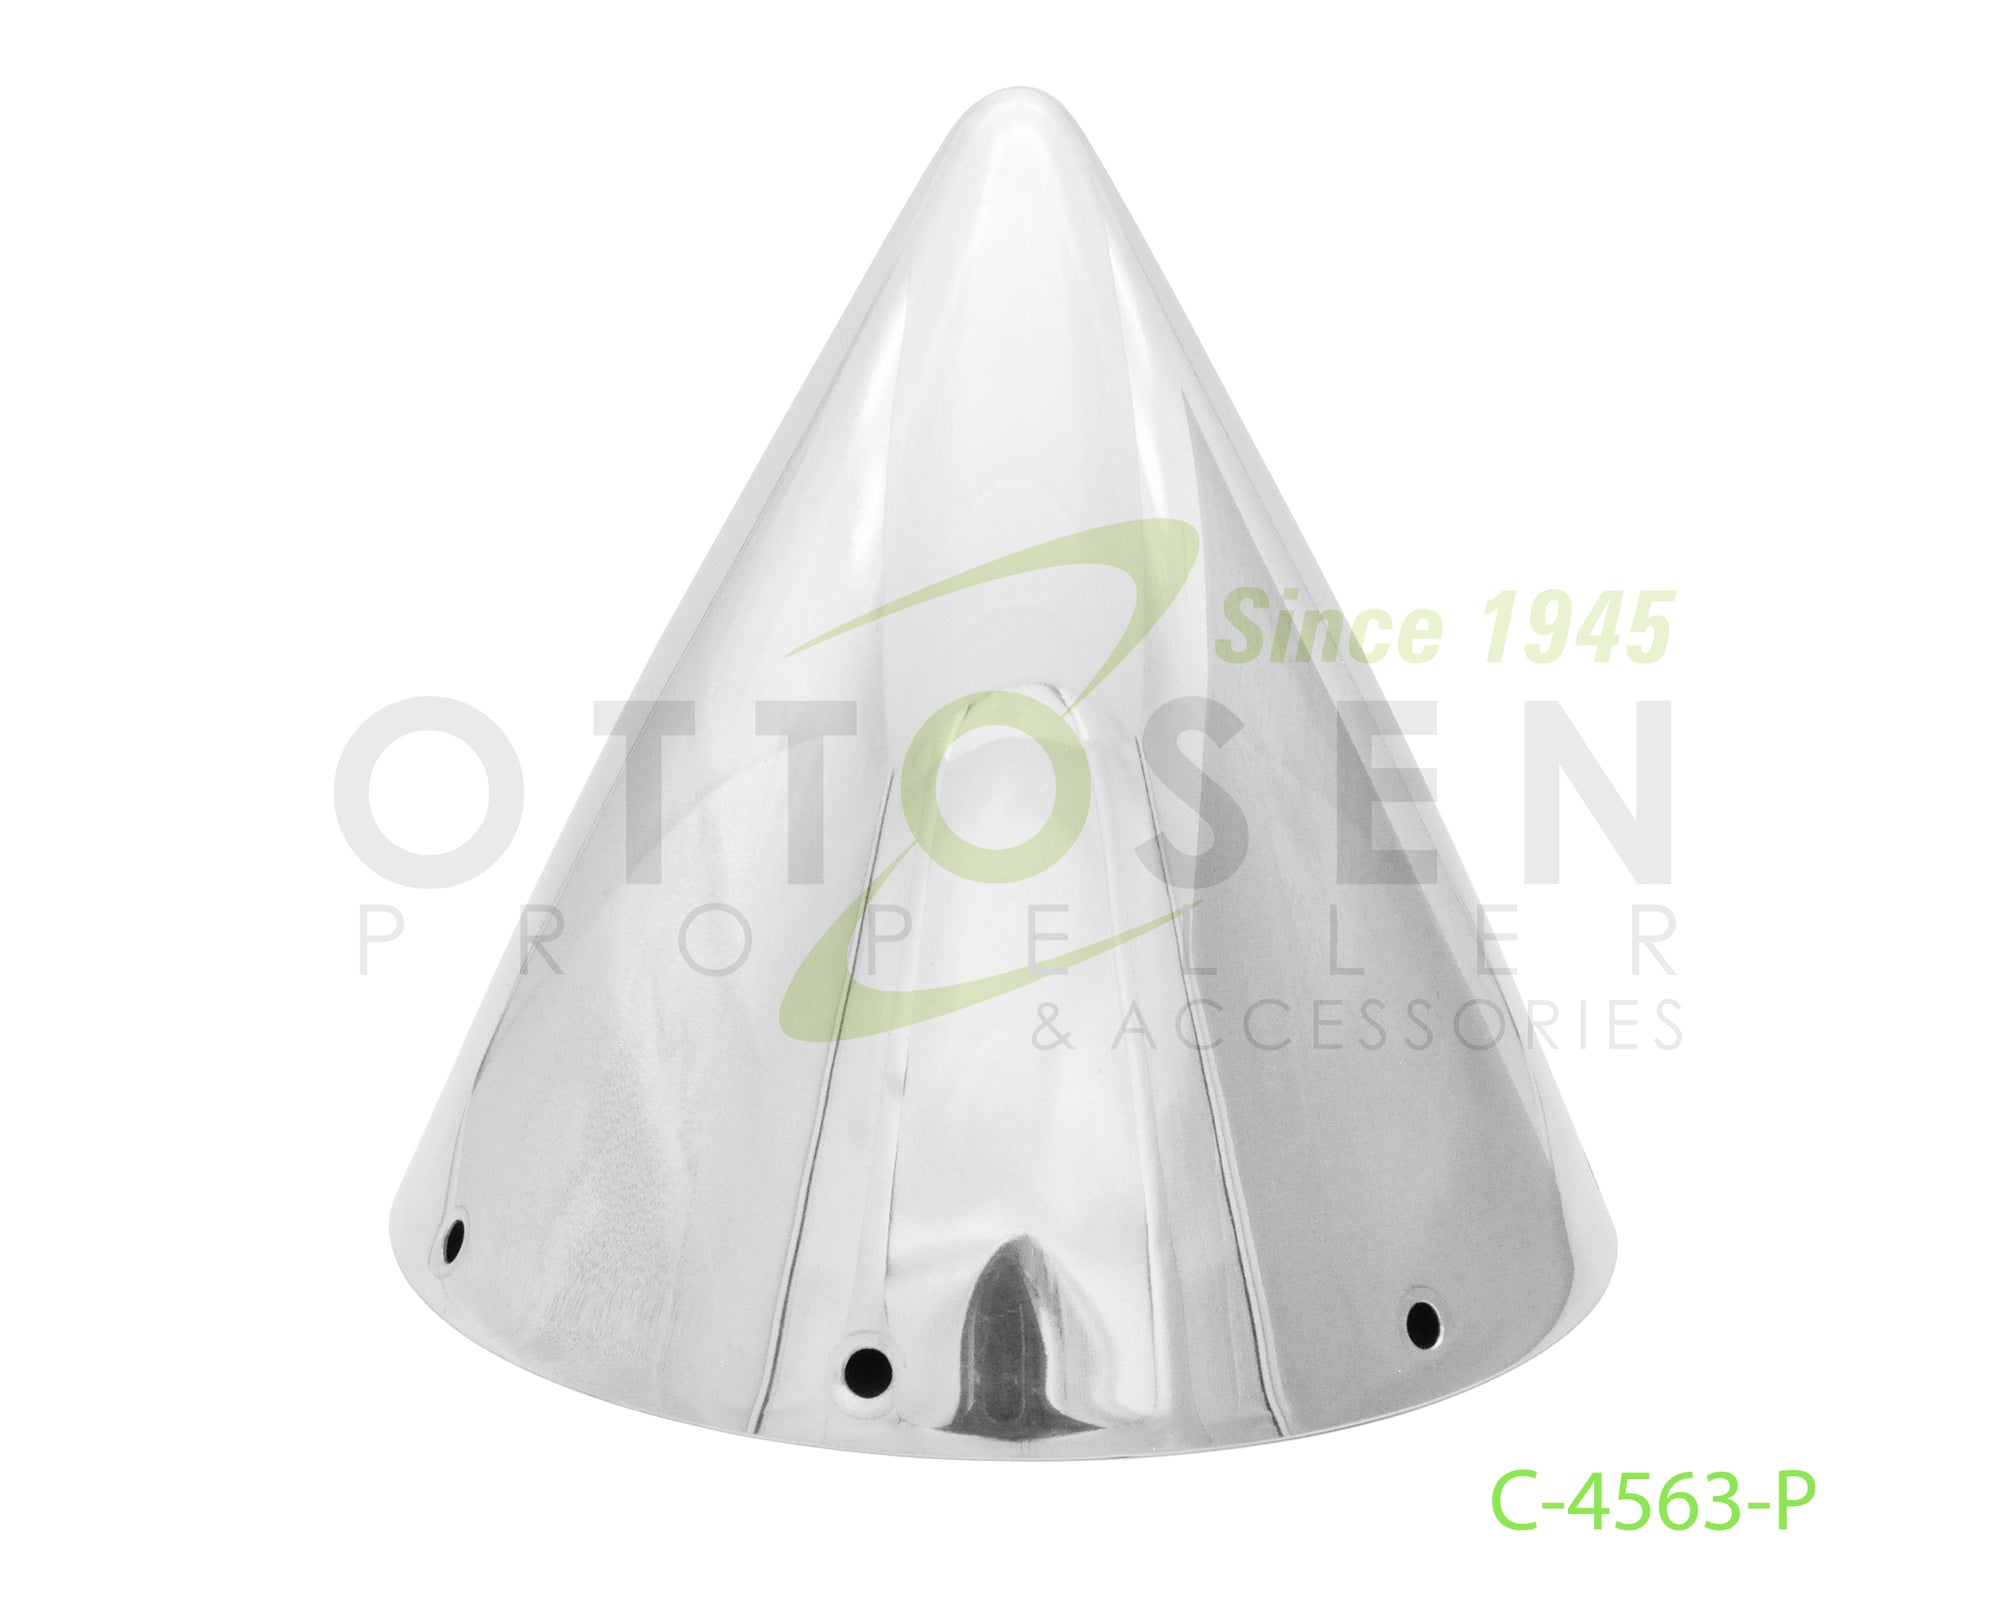 C-4563-P-HARTZELL-PROPELLER-SPINNER-DOME-CAP-POLISHED-PICTURE-1